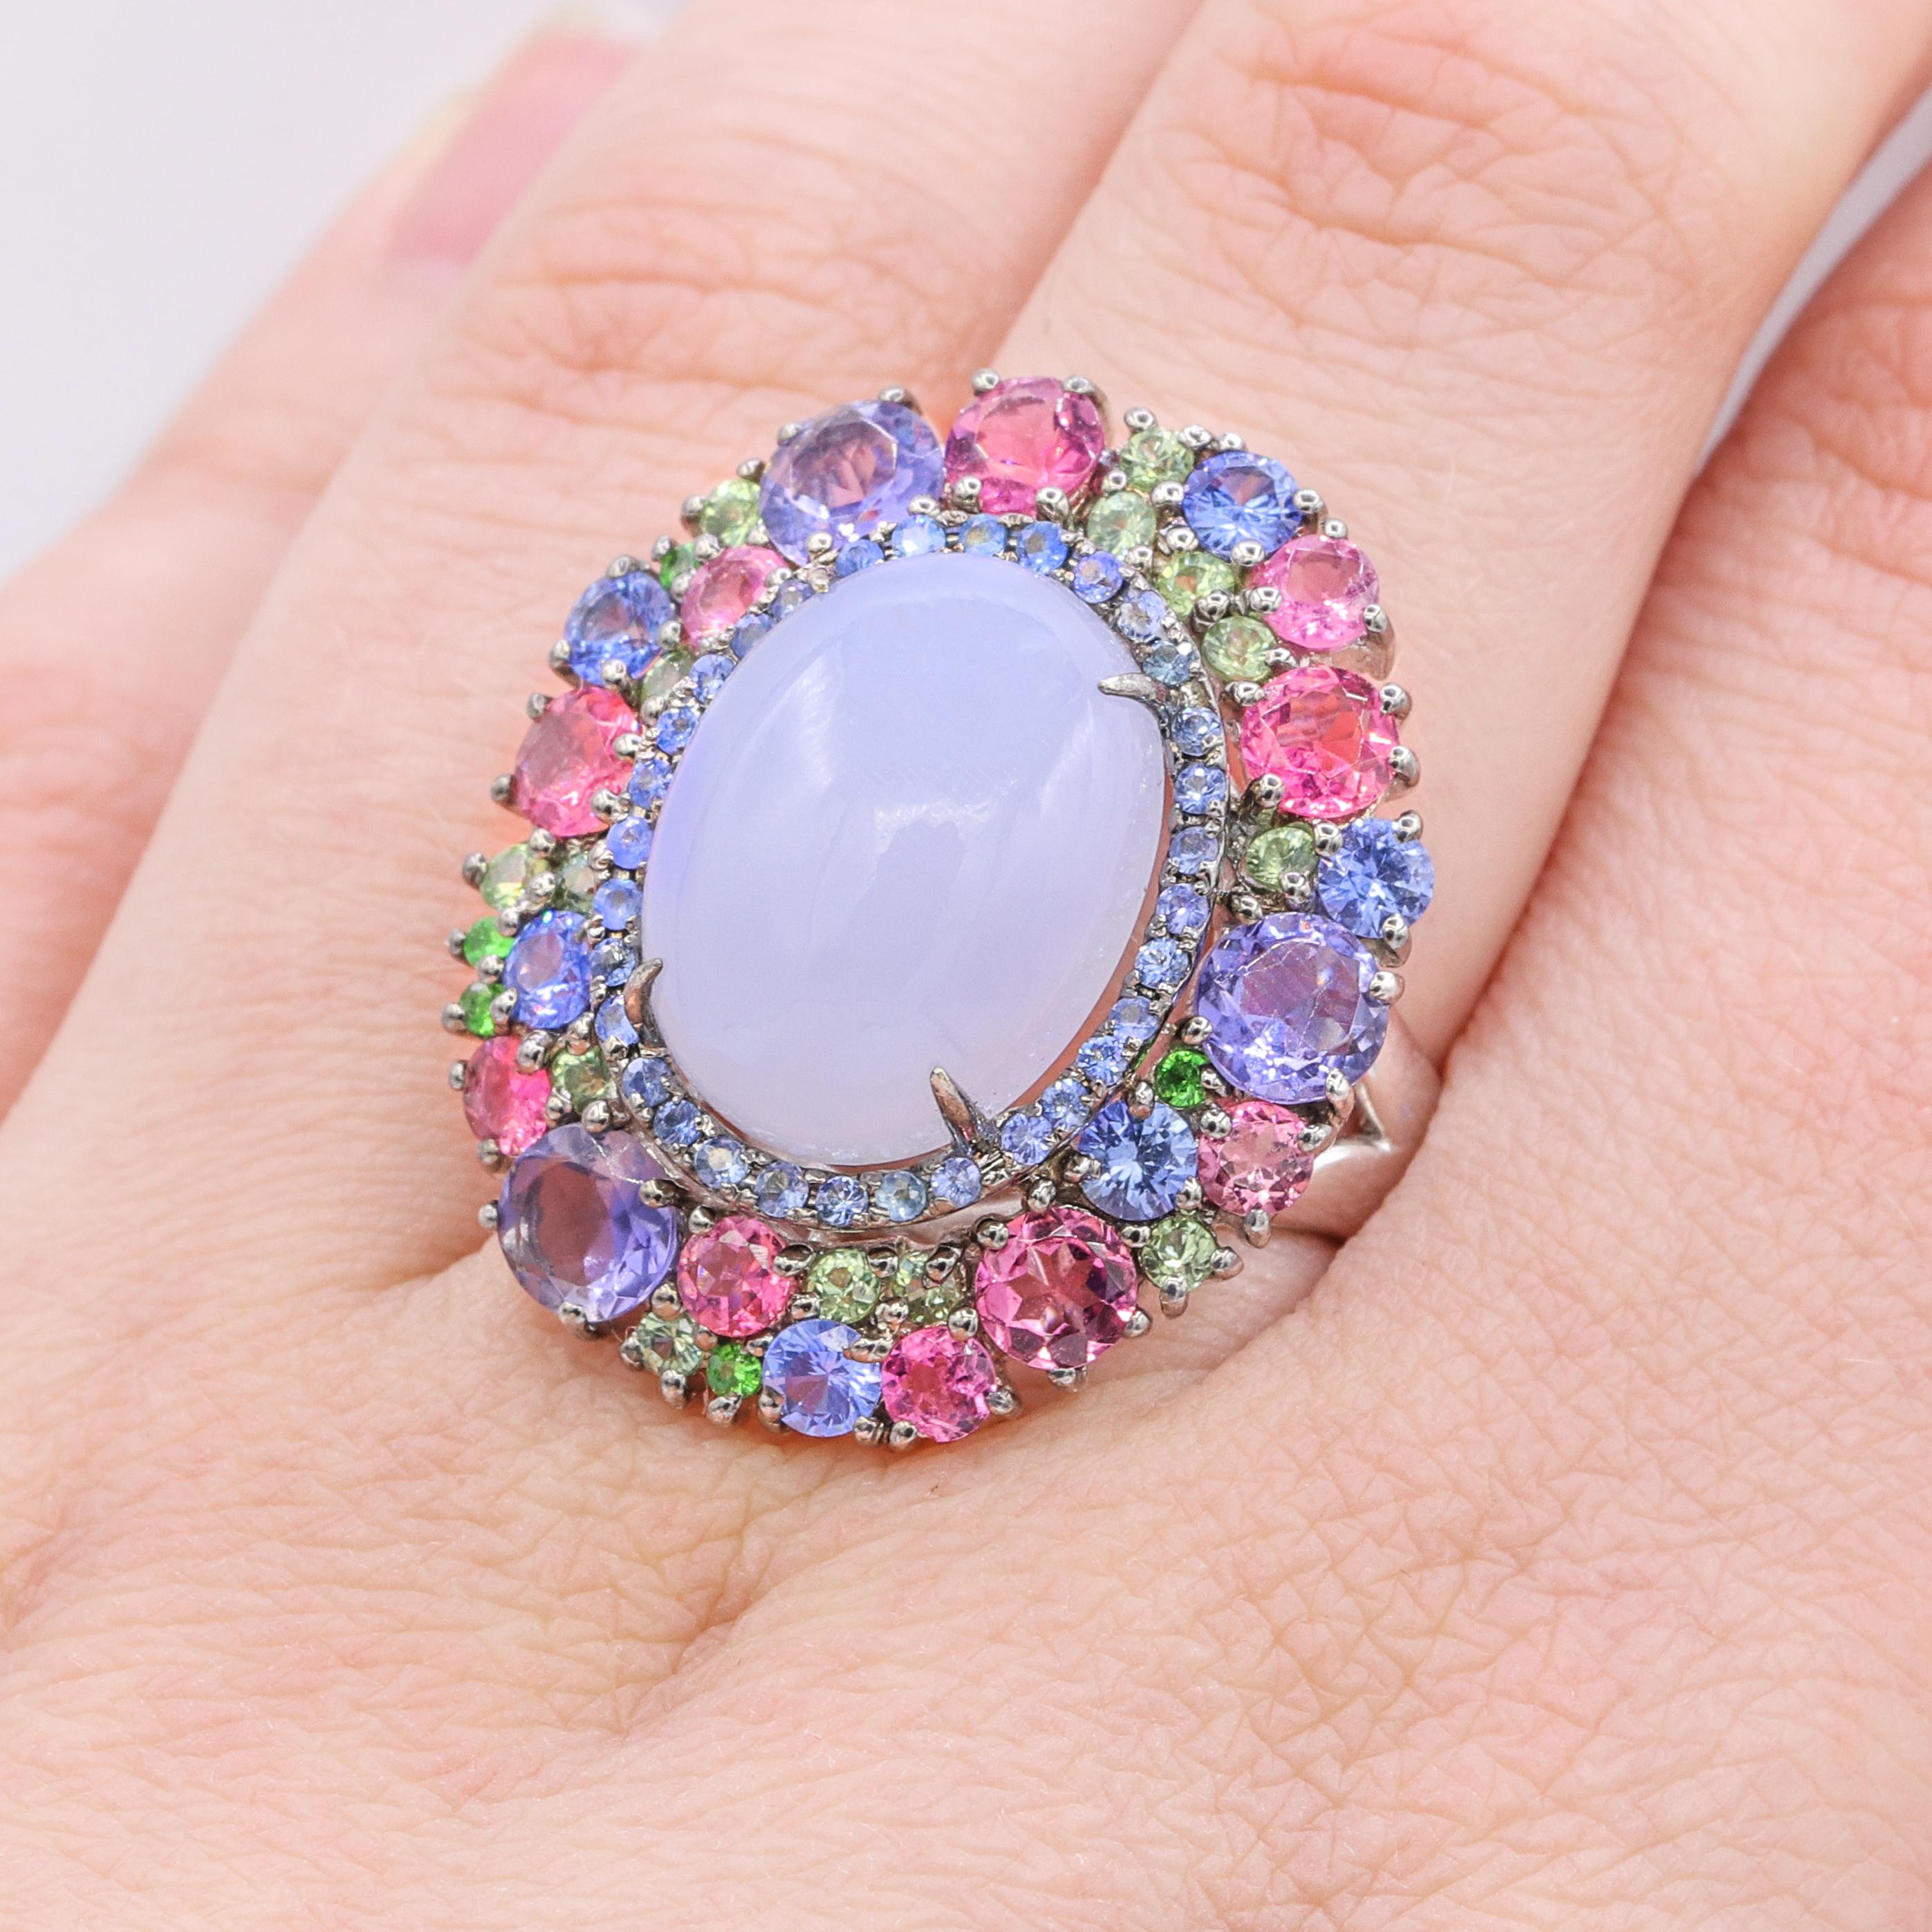 Oval Cut 13.53 Carat Moonstone Multicolored Gemstones Ring  For Sale